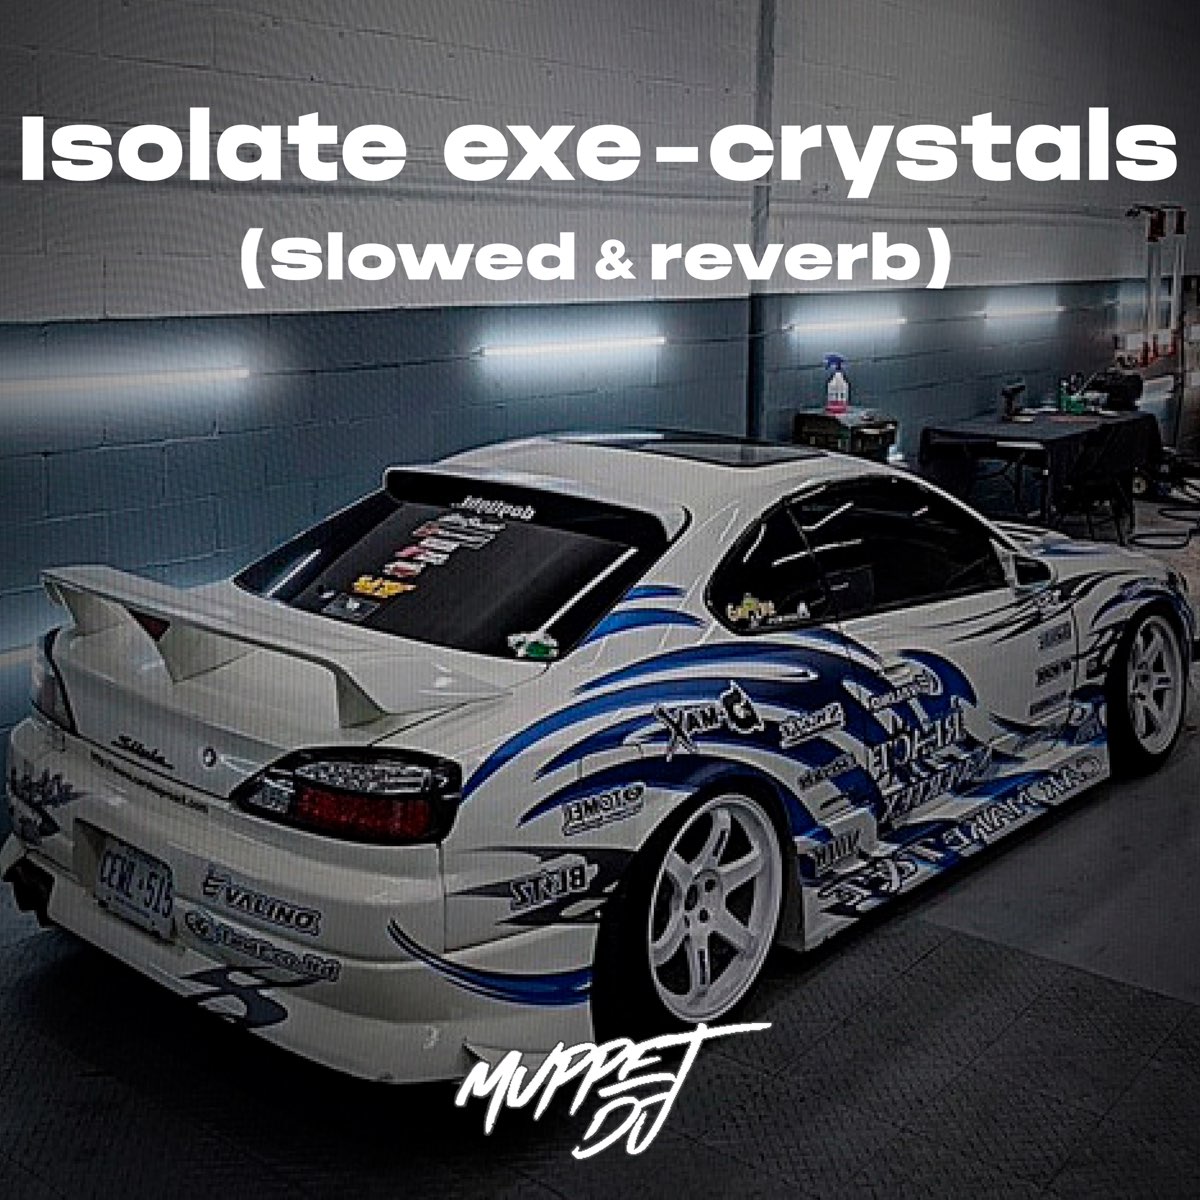 Isolate exe crystals reverb. Crystals isolate.exe. Isolate exe. Isolate.exe - Crystals (Slowed € Reverb). Crystal exe.